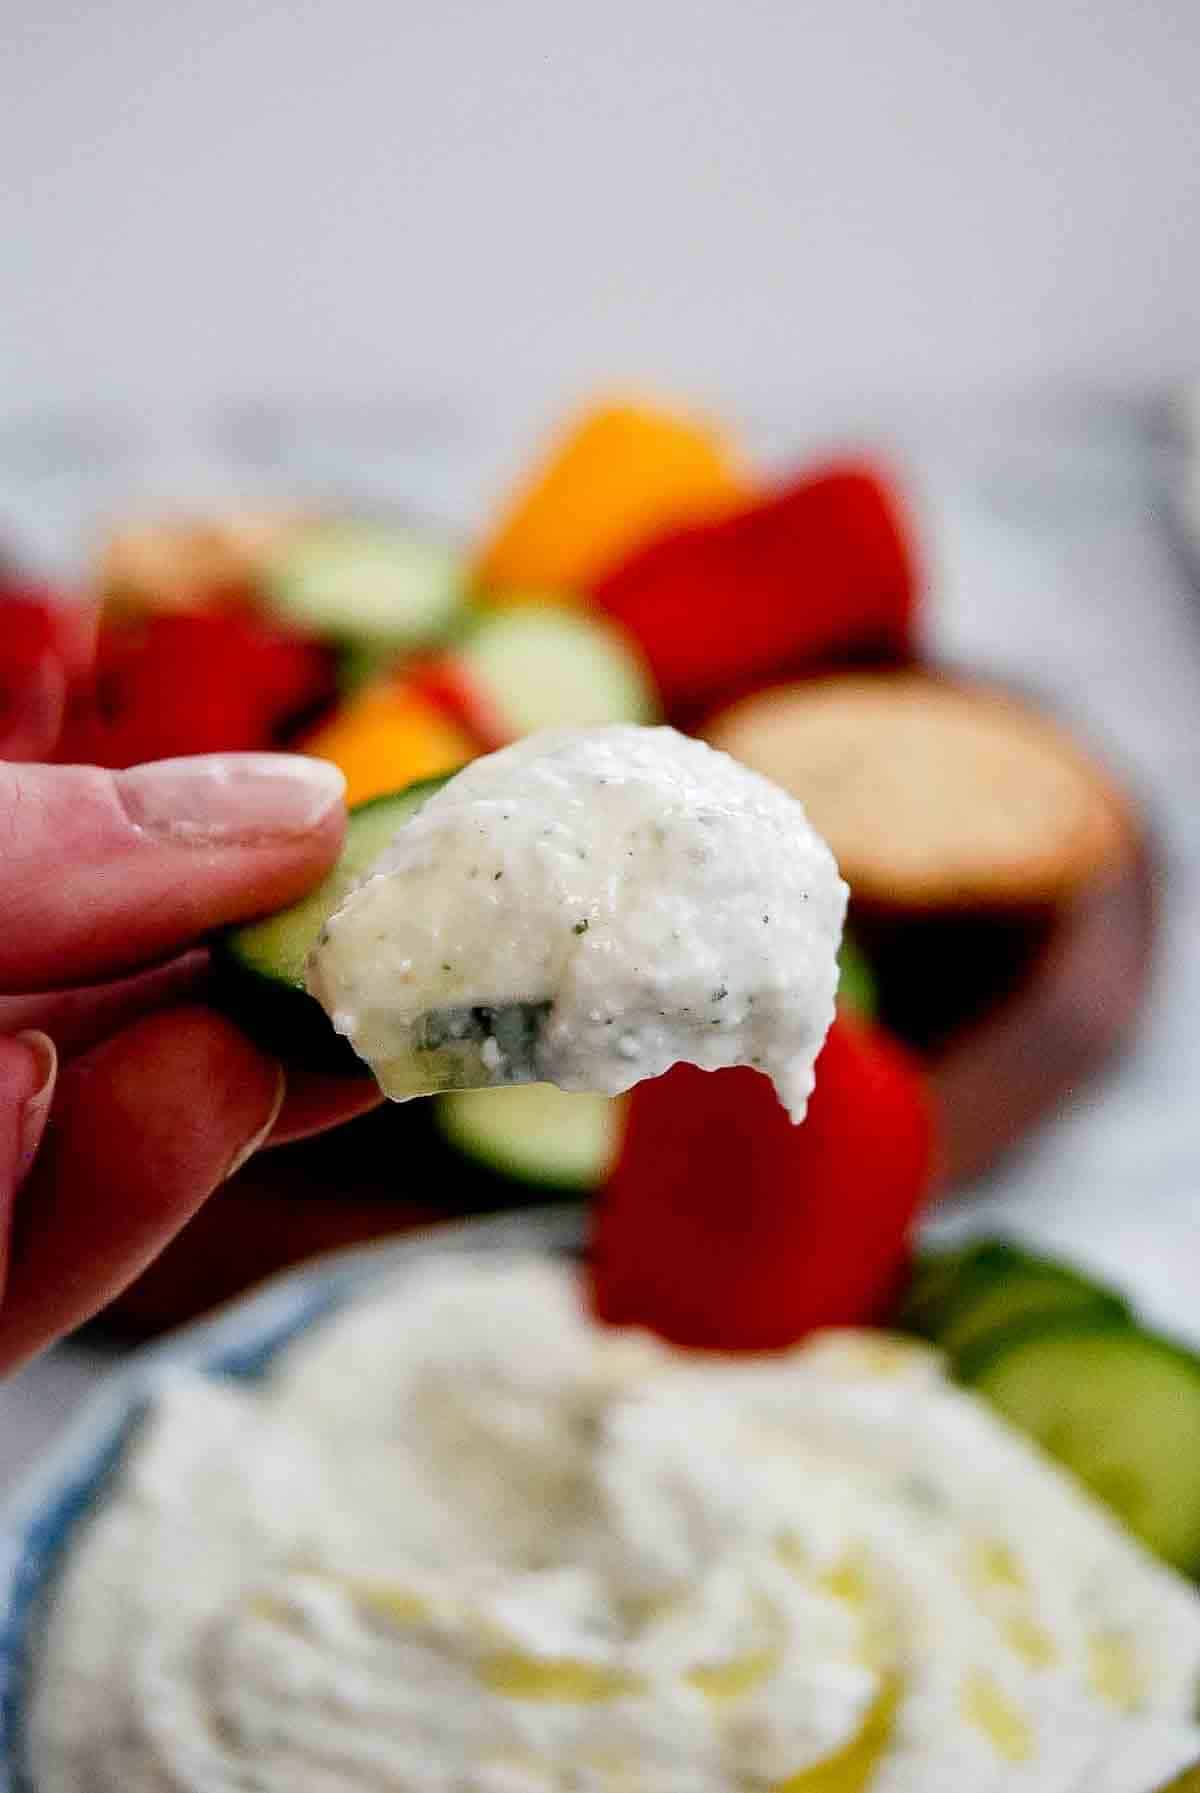 cucumber dipped in cottage cheese ranch dip.